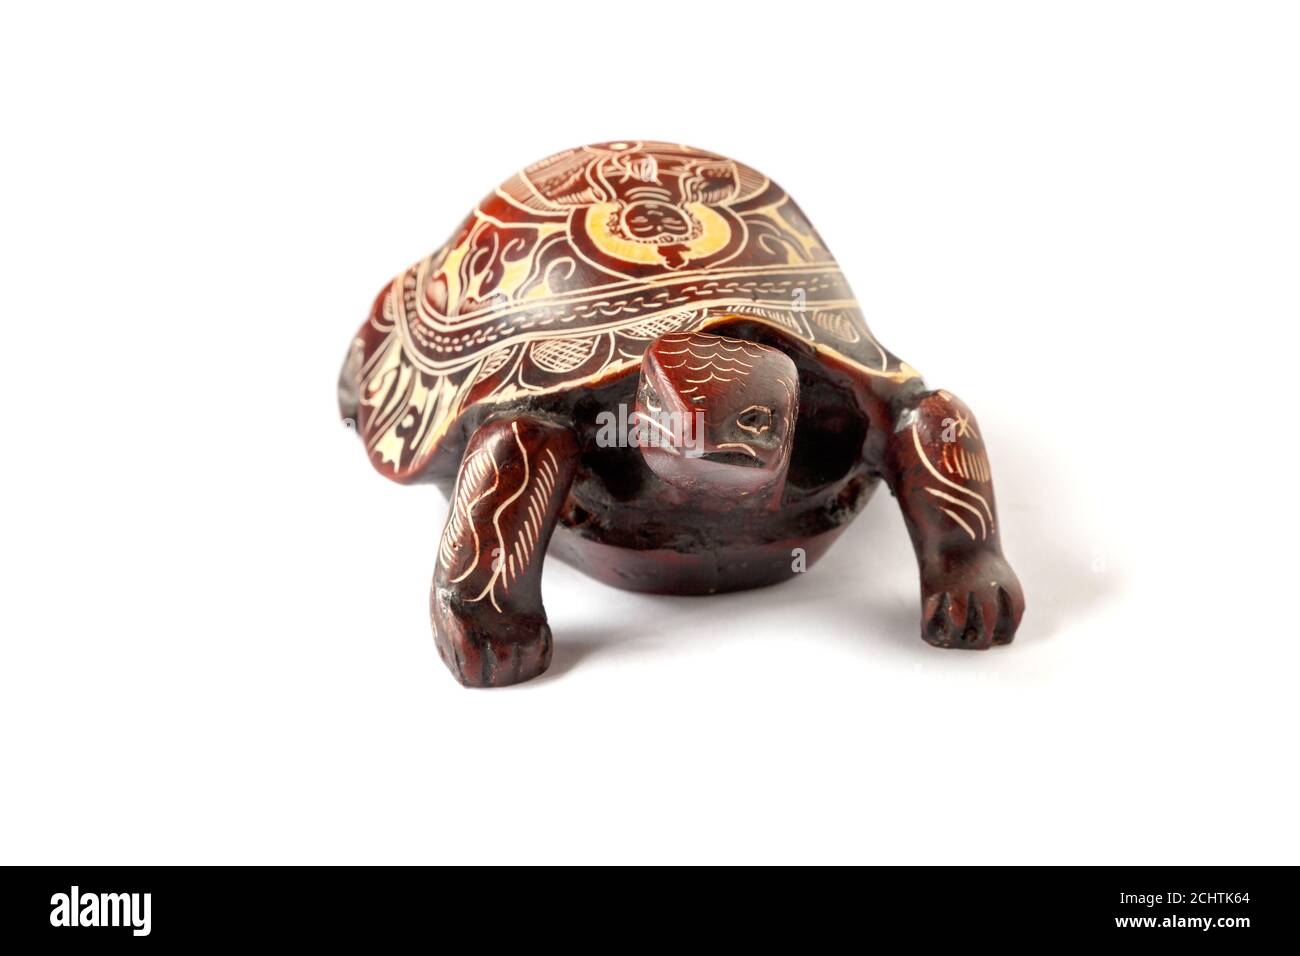 Turtle with the image of the Buddha on the shell, white background. Front view. Stock Photo